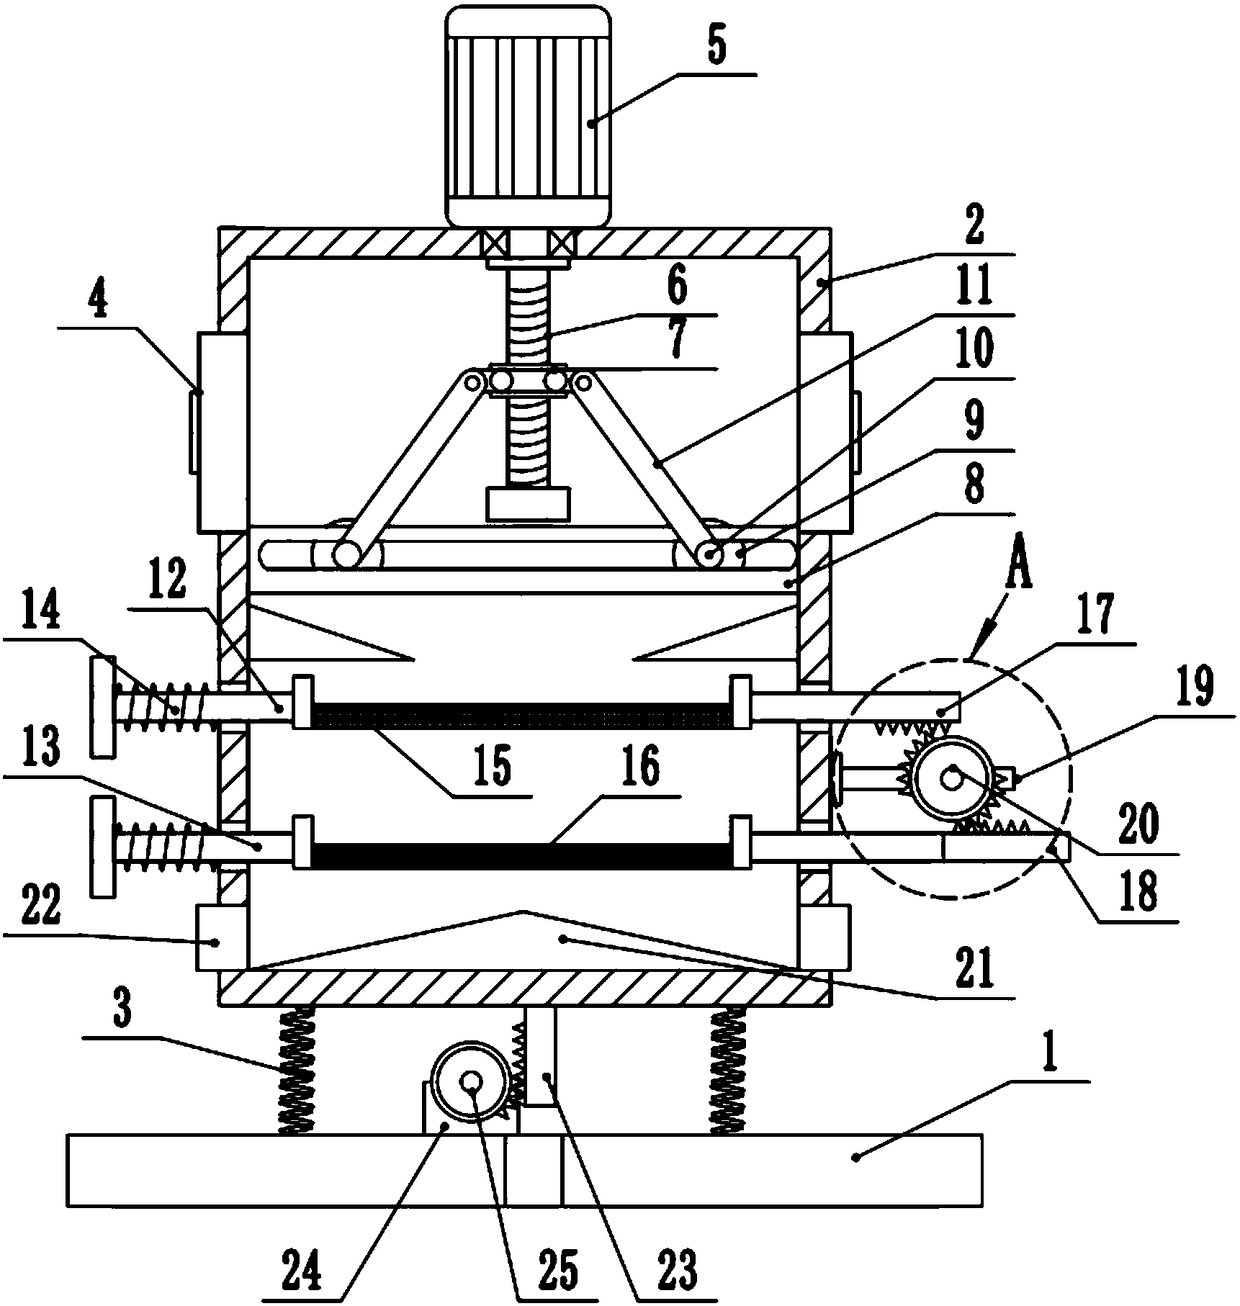 Gear driven vibrating activated carbon grinding screening device